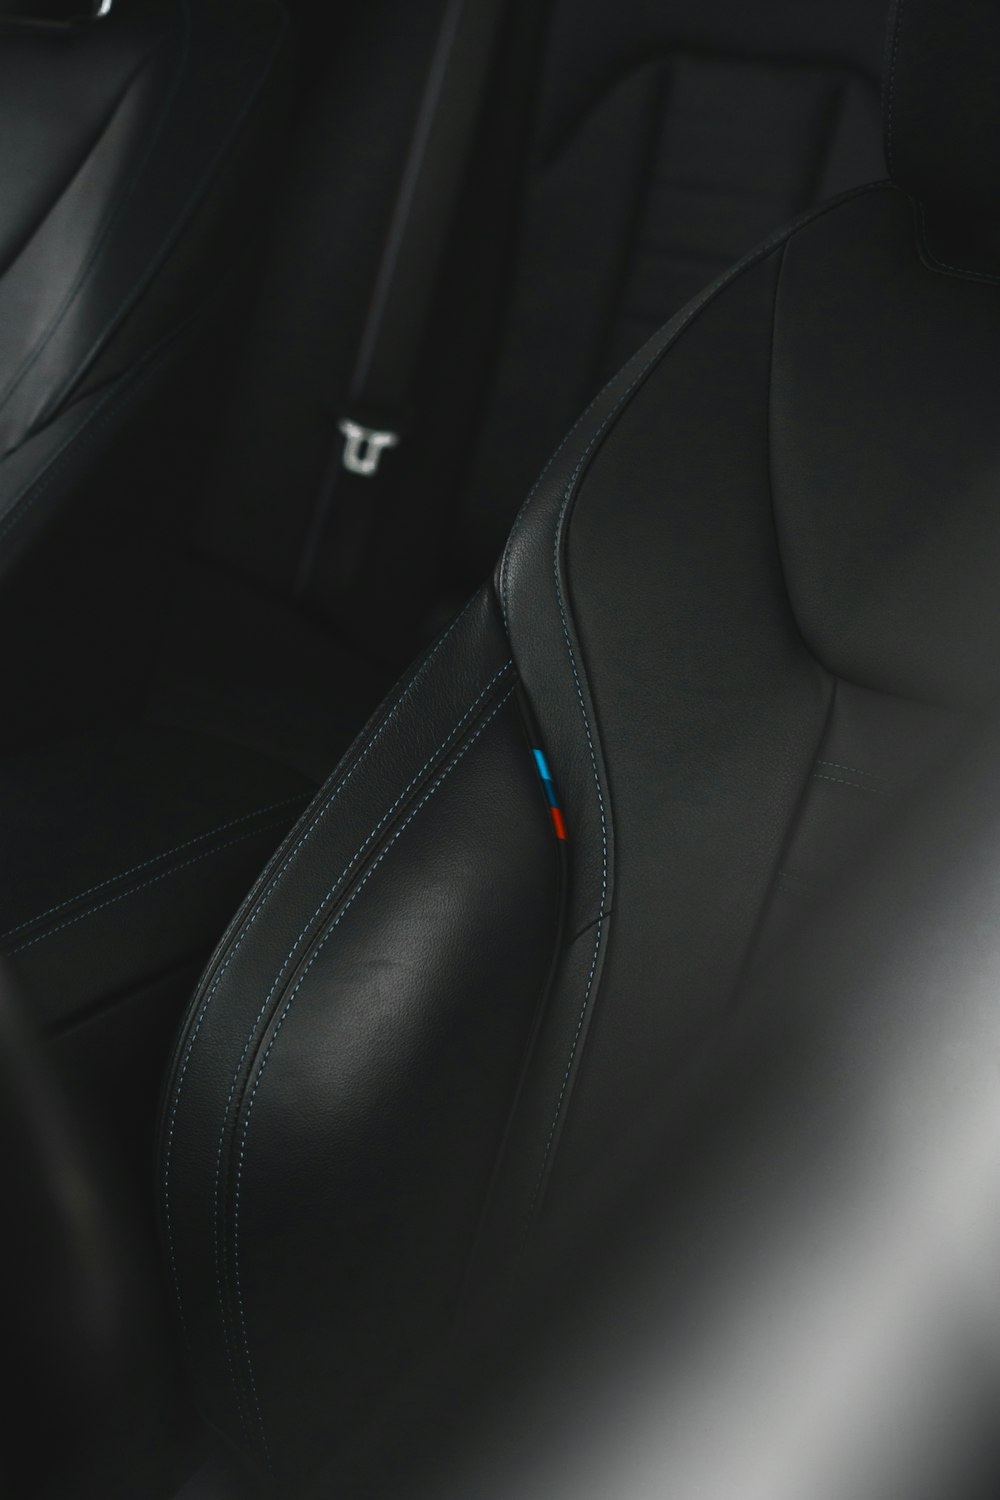 the interior of a car with black leather